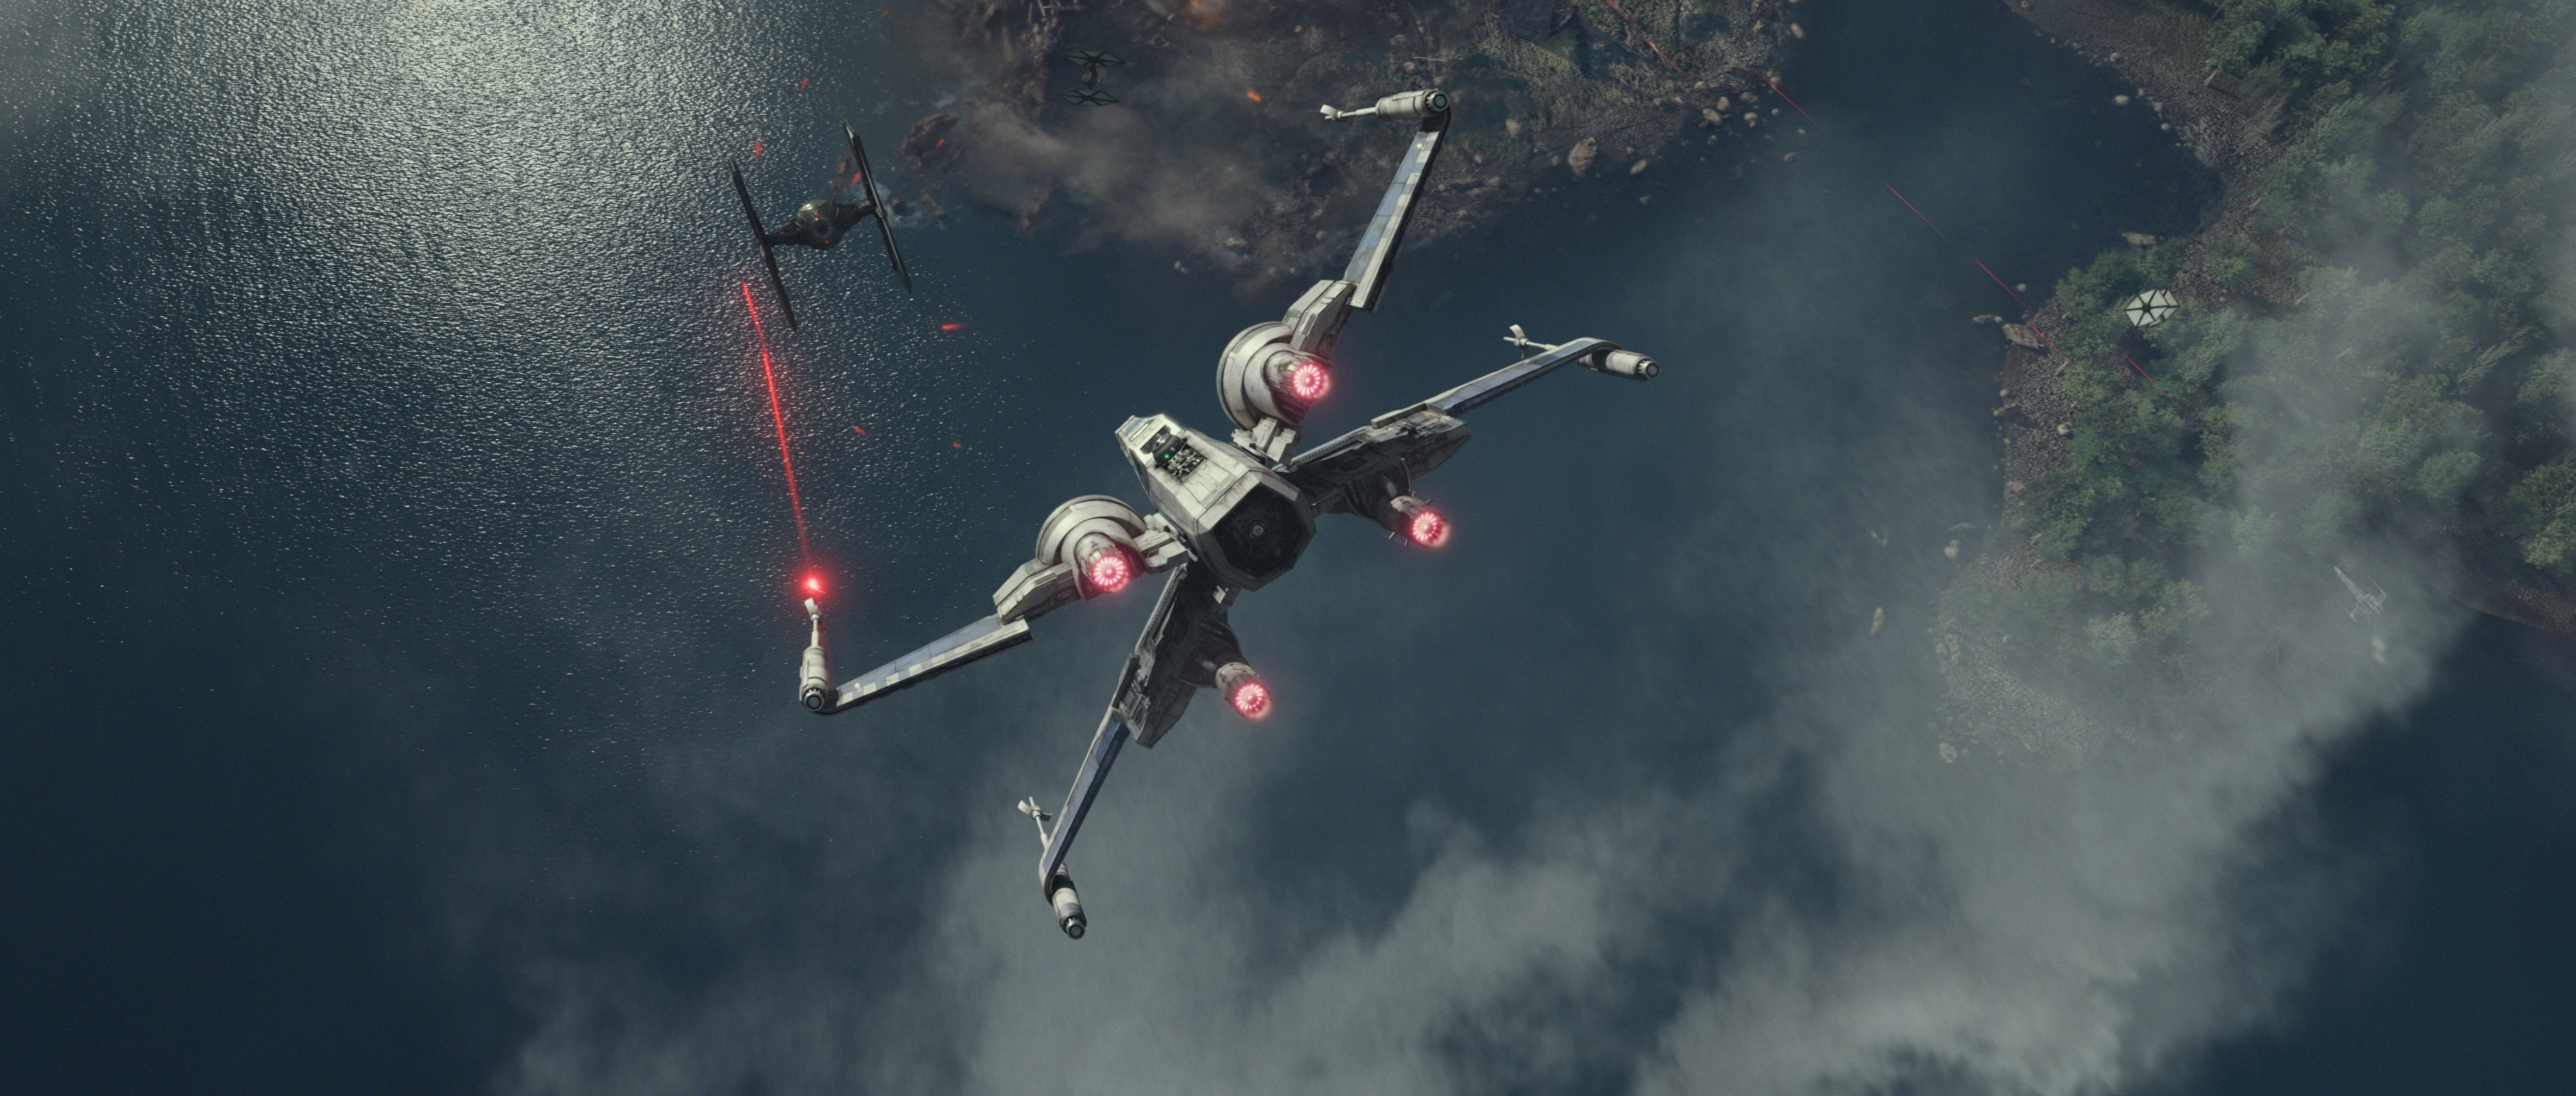 Star Wars: The Force Awakens, X-wing, TIE Fighter, movies, cloud - sky